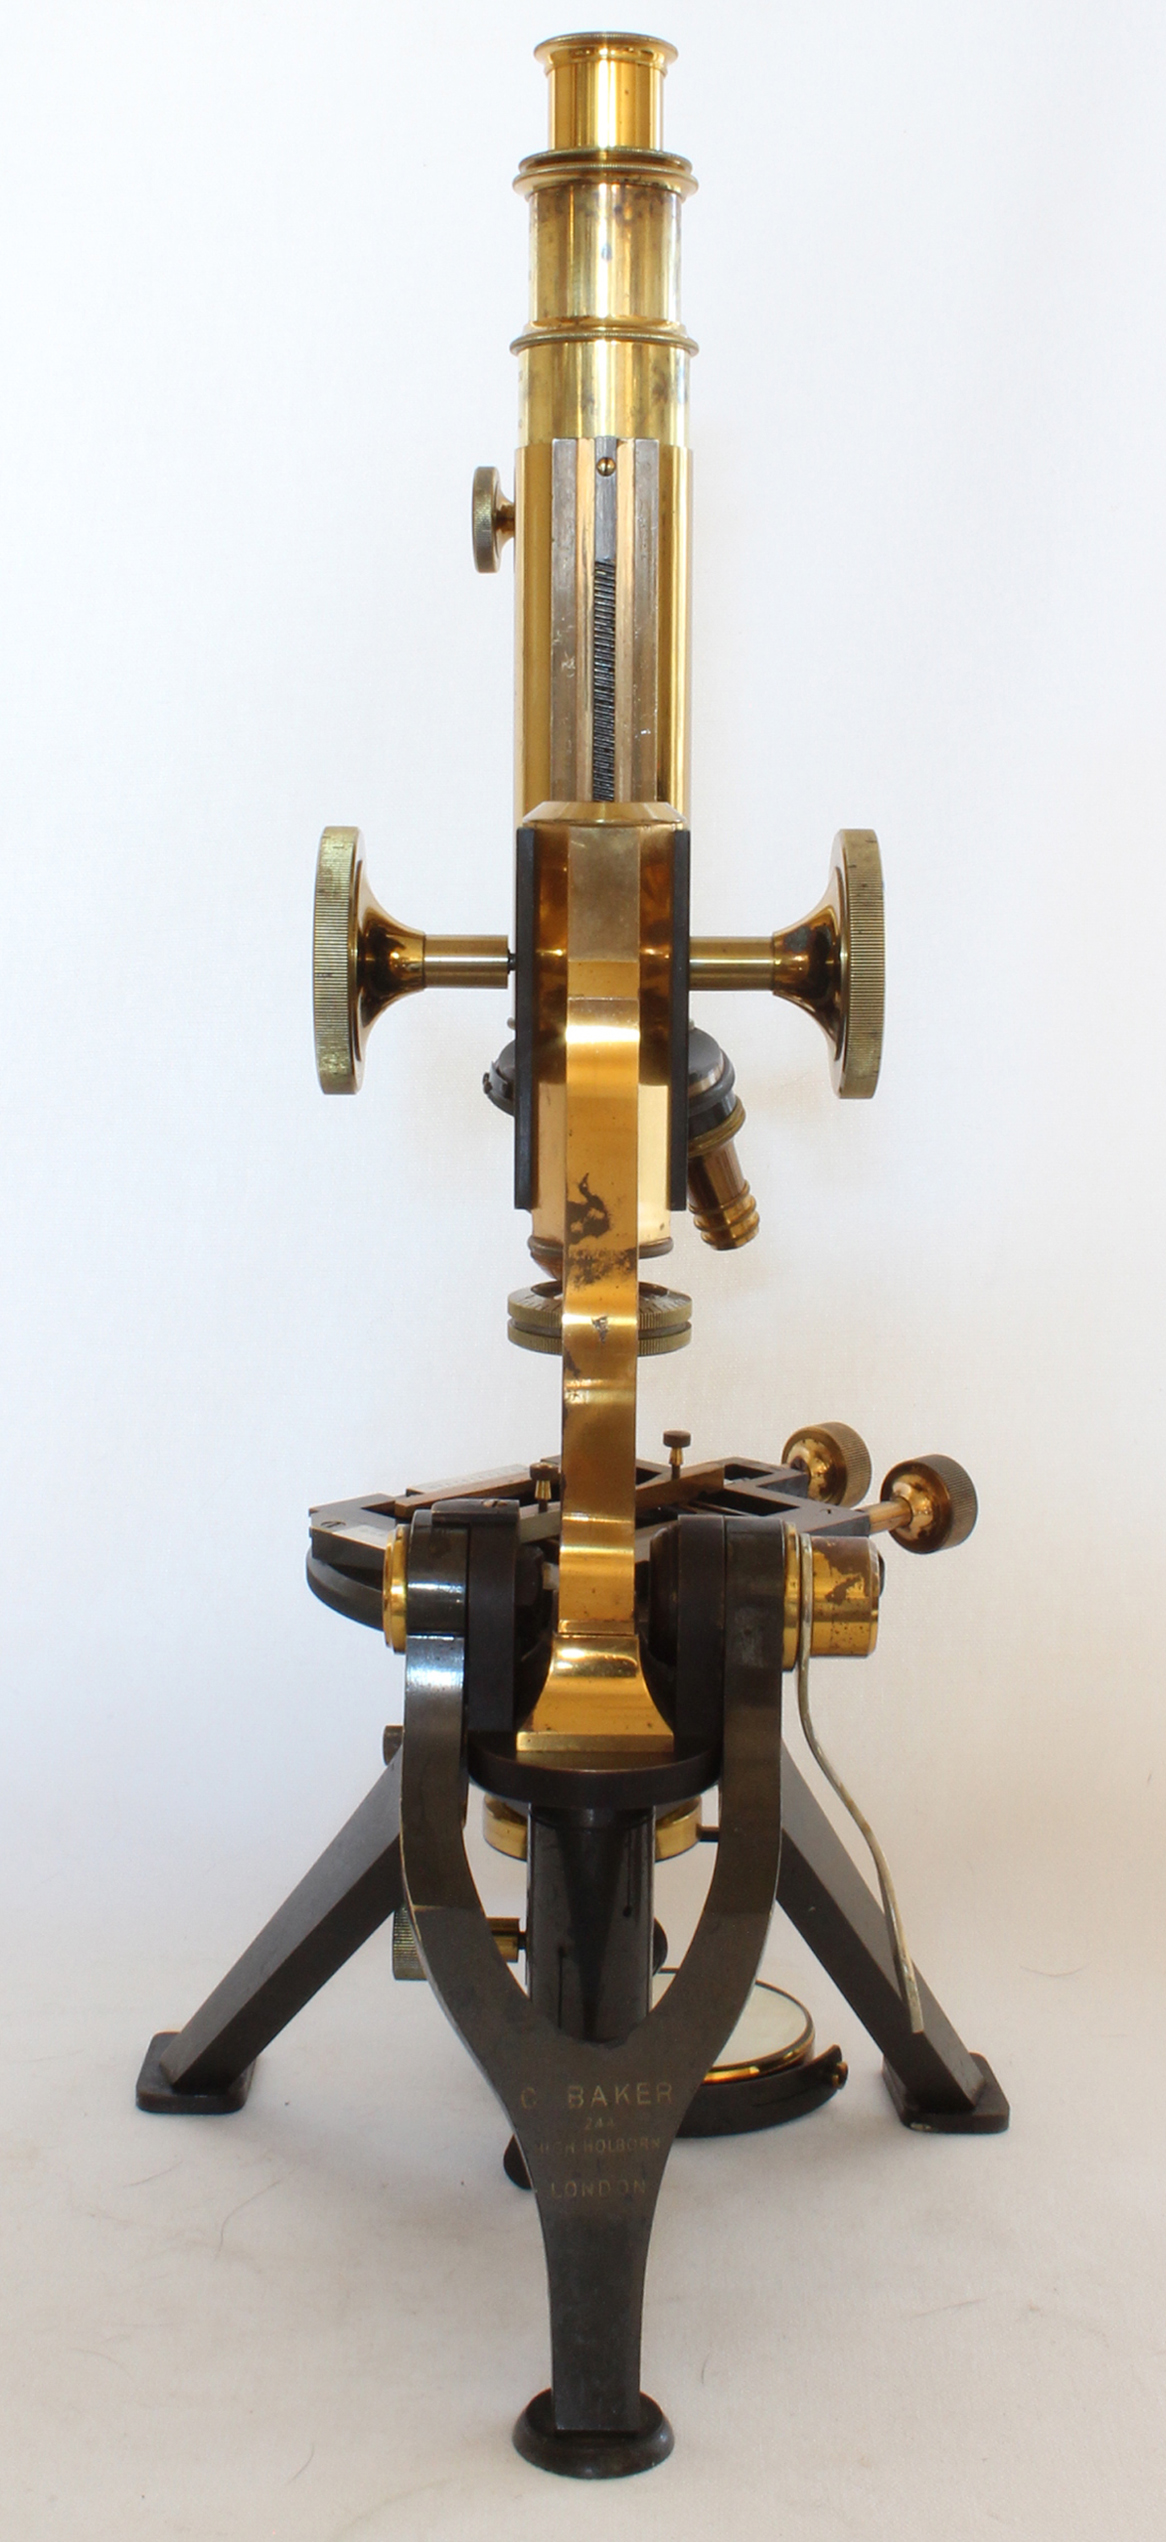 Nelson-Curties-Baker Microscope Rear view